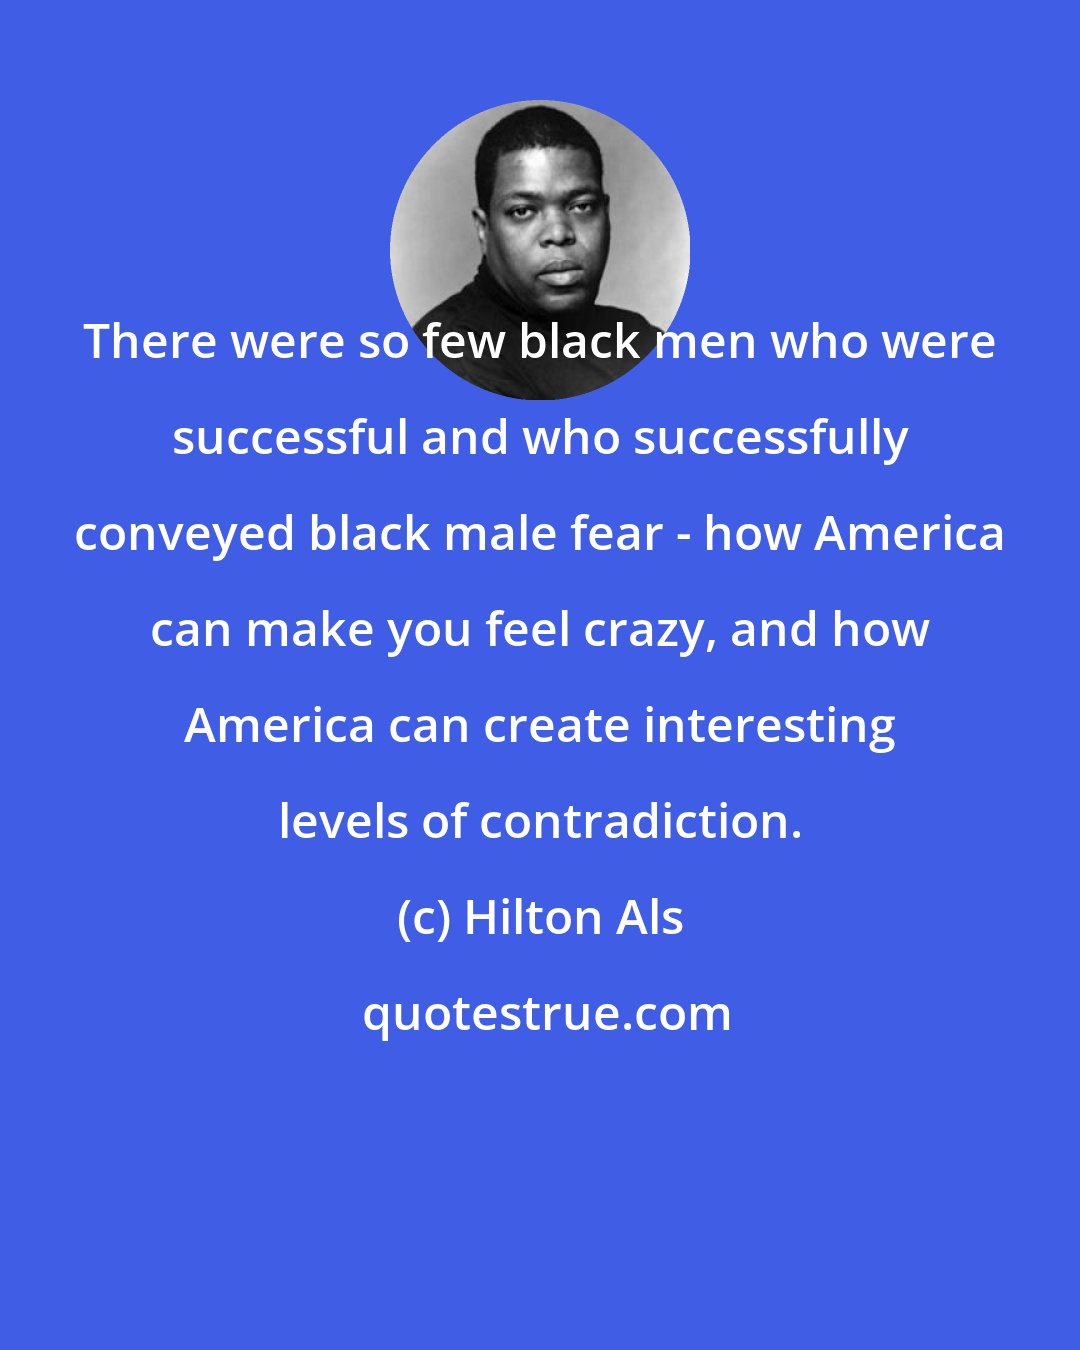 Hilton Als: There were so few black men who were successful and who successfully conveyed black male fear - how America can make you feel crazy, and how America can create interesting levels of contradiction.